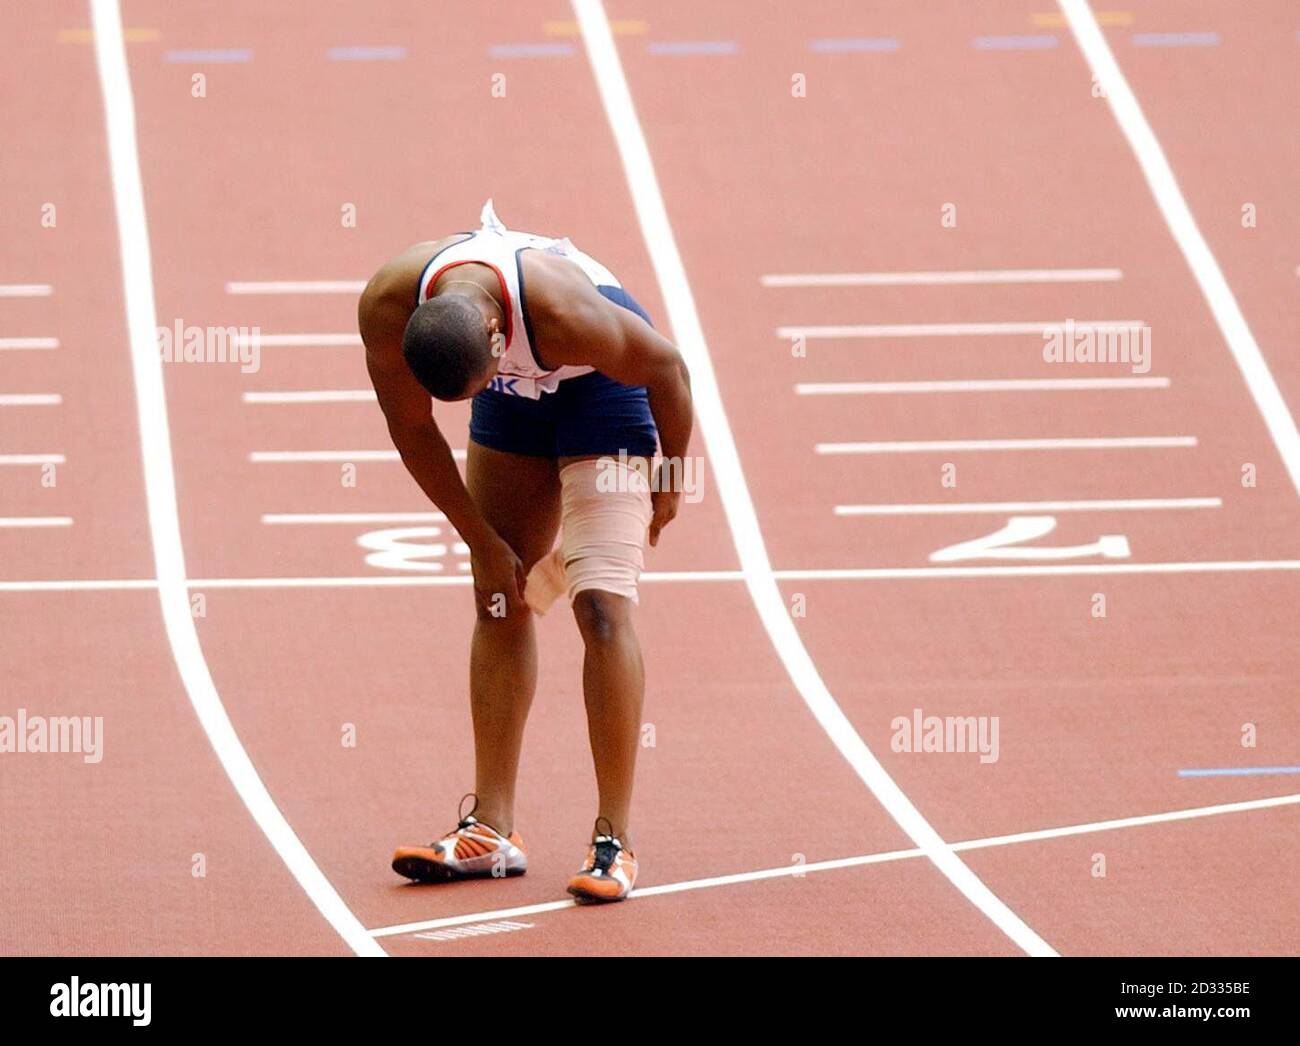 Great Britain's Darren Campbell wraps up his injured leg after finishing second behind the USA team in the men's 4x100 relay final at the Athletics World Championships in Paris. Stock Photo